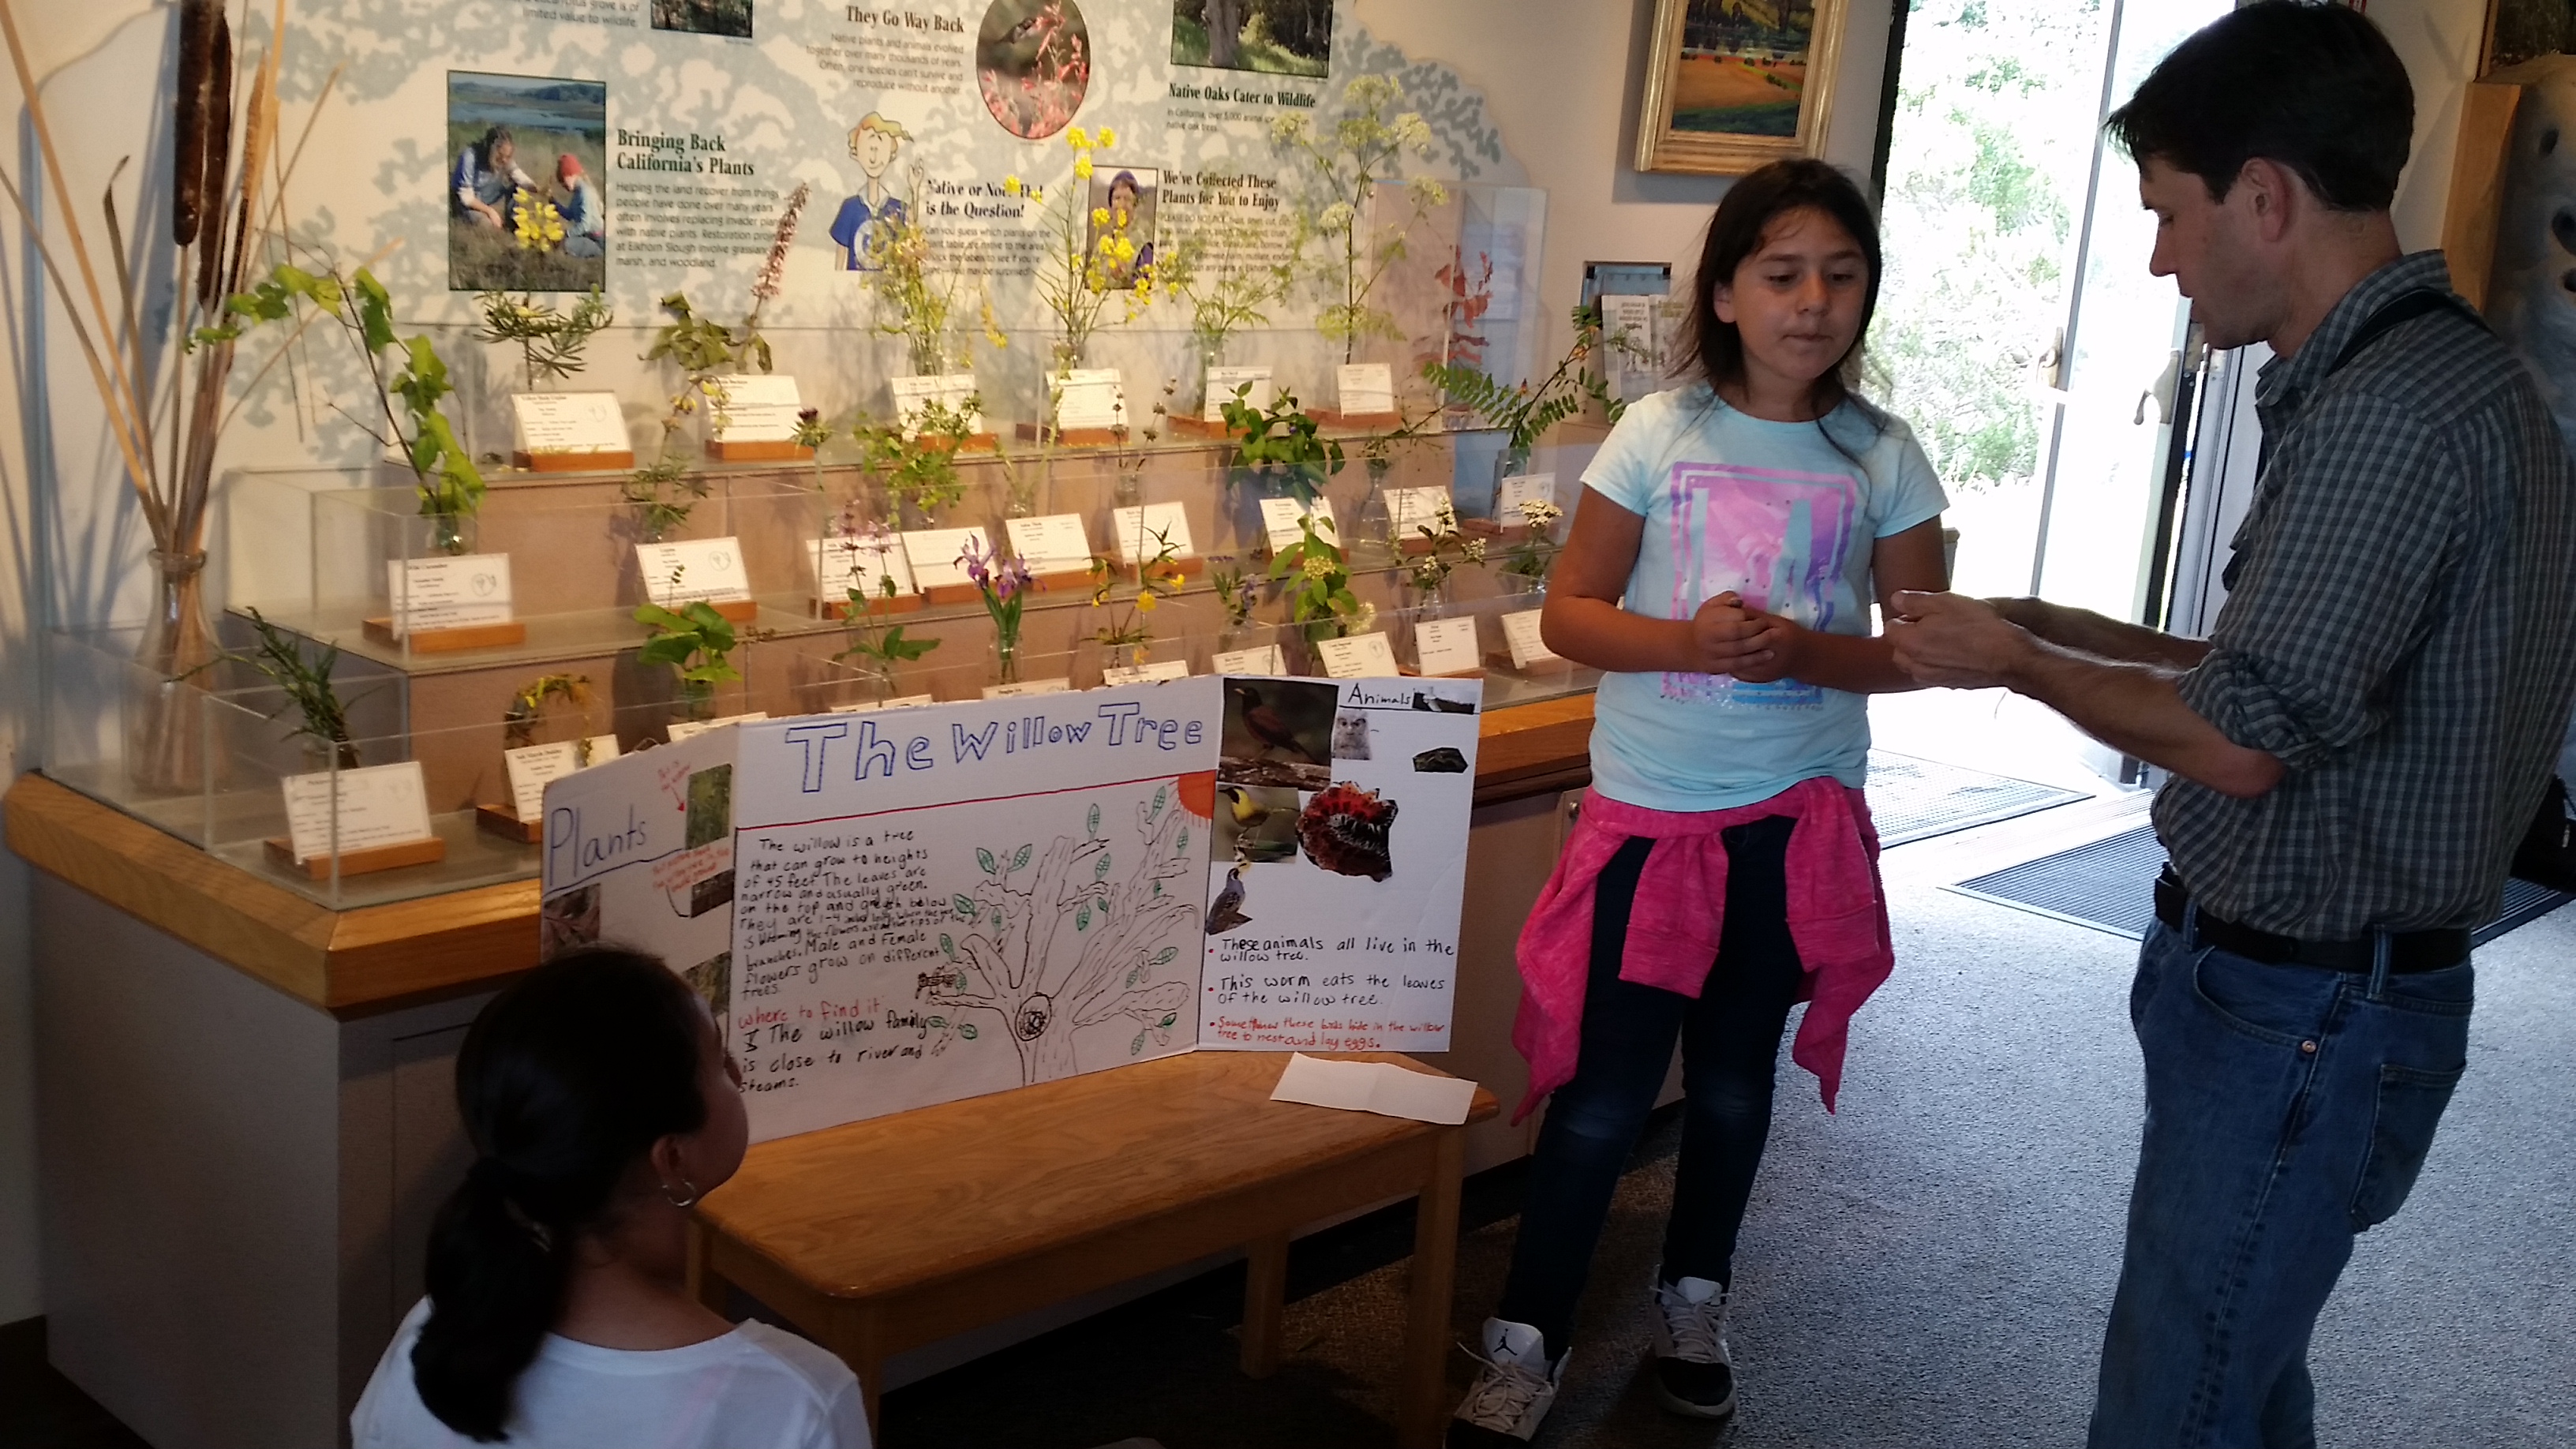 A student presents her project on the willow tree at the Elkhorn Slough National Estuarine Research Reserve.